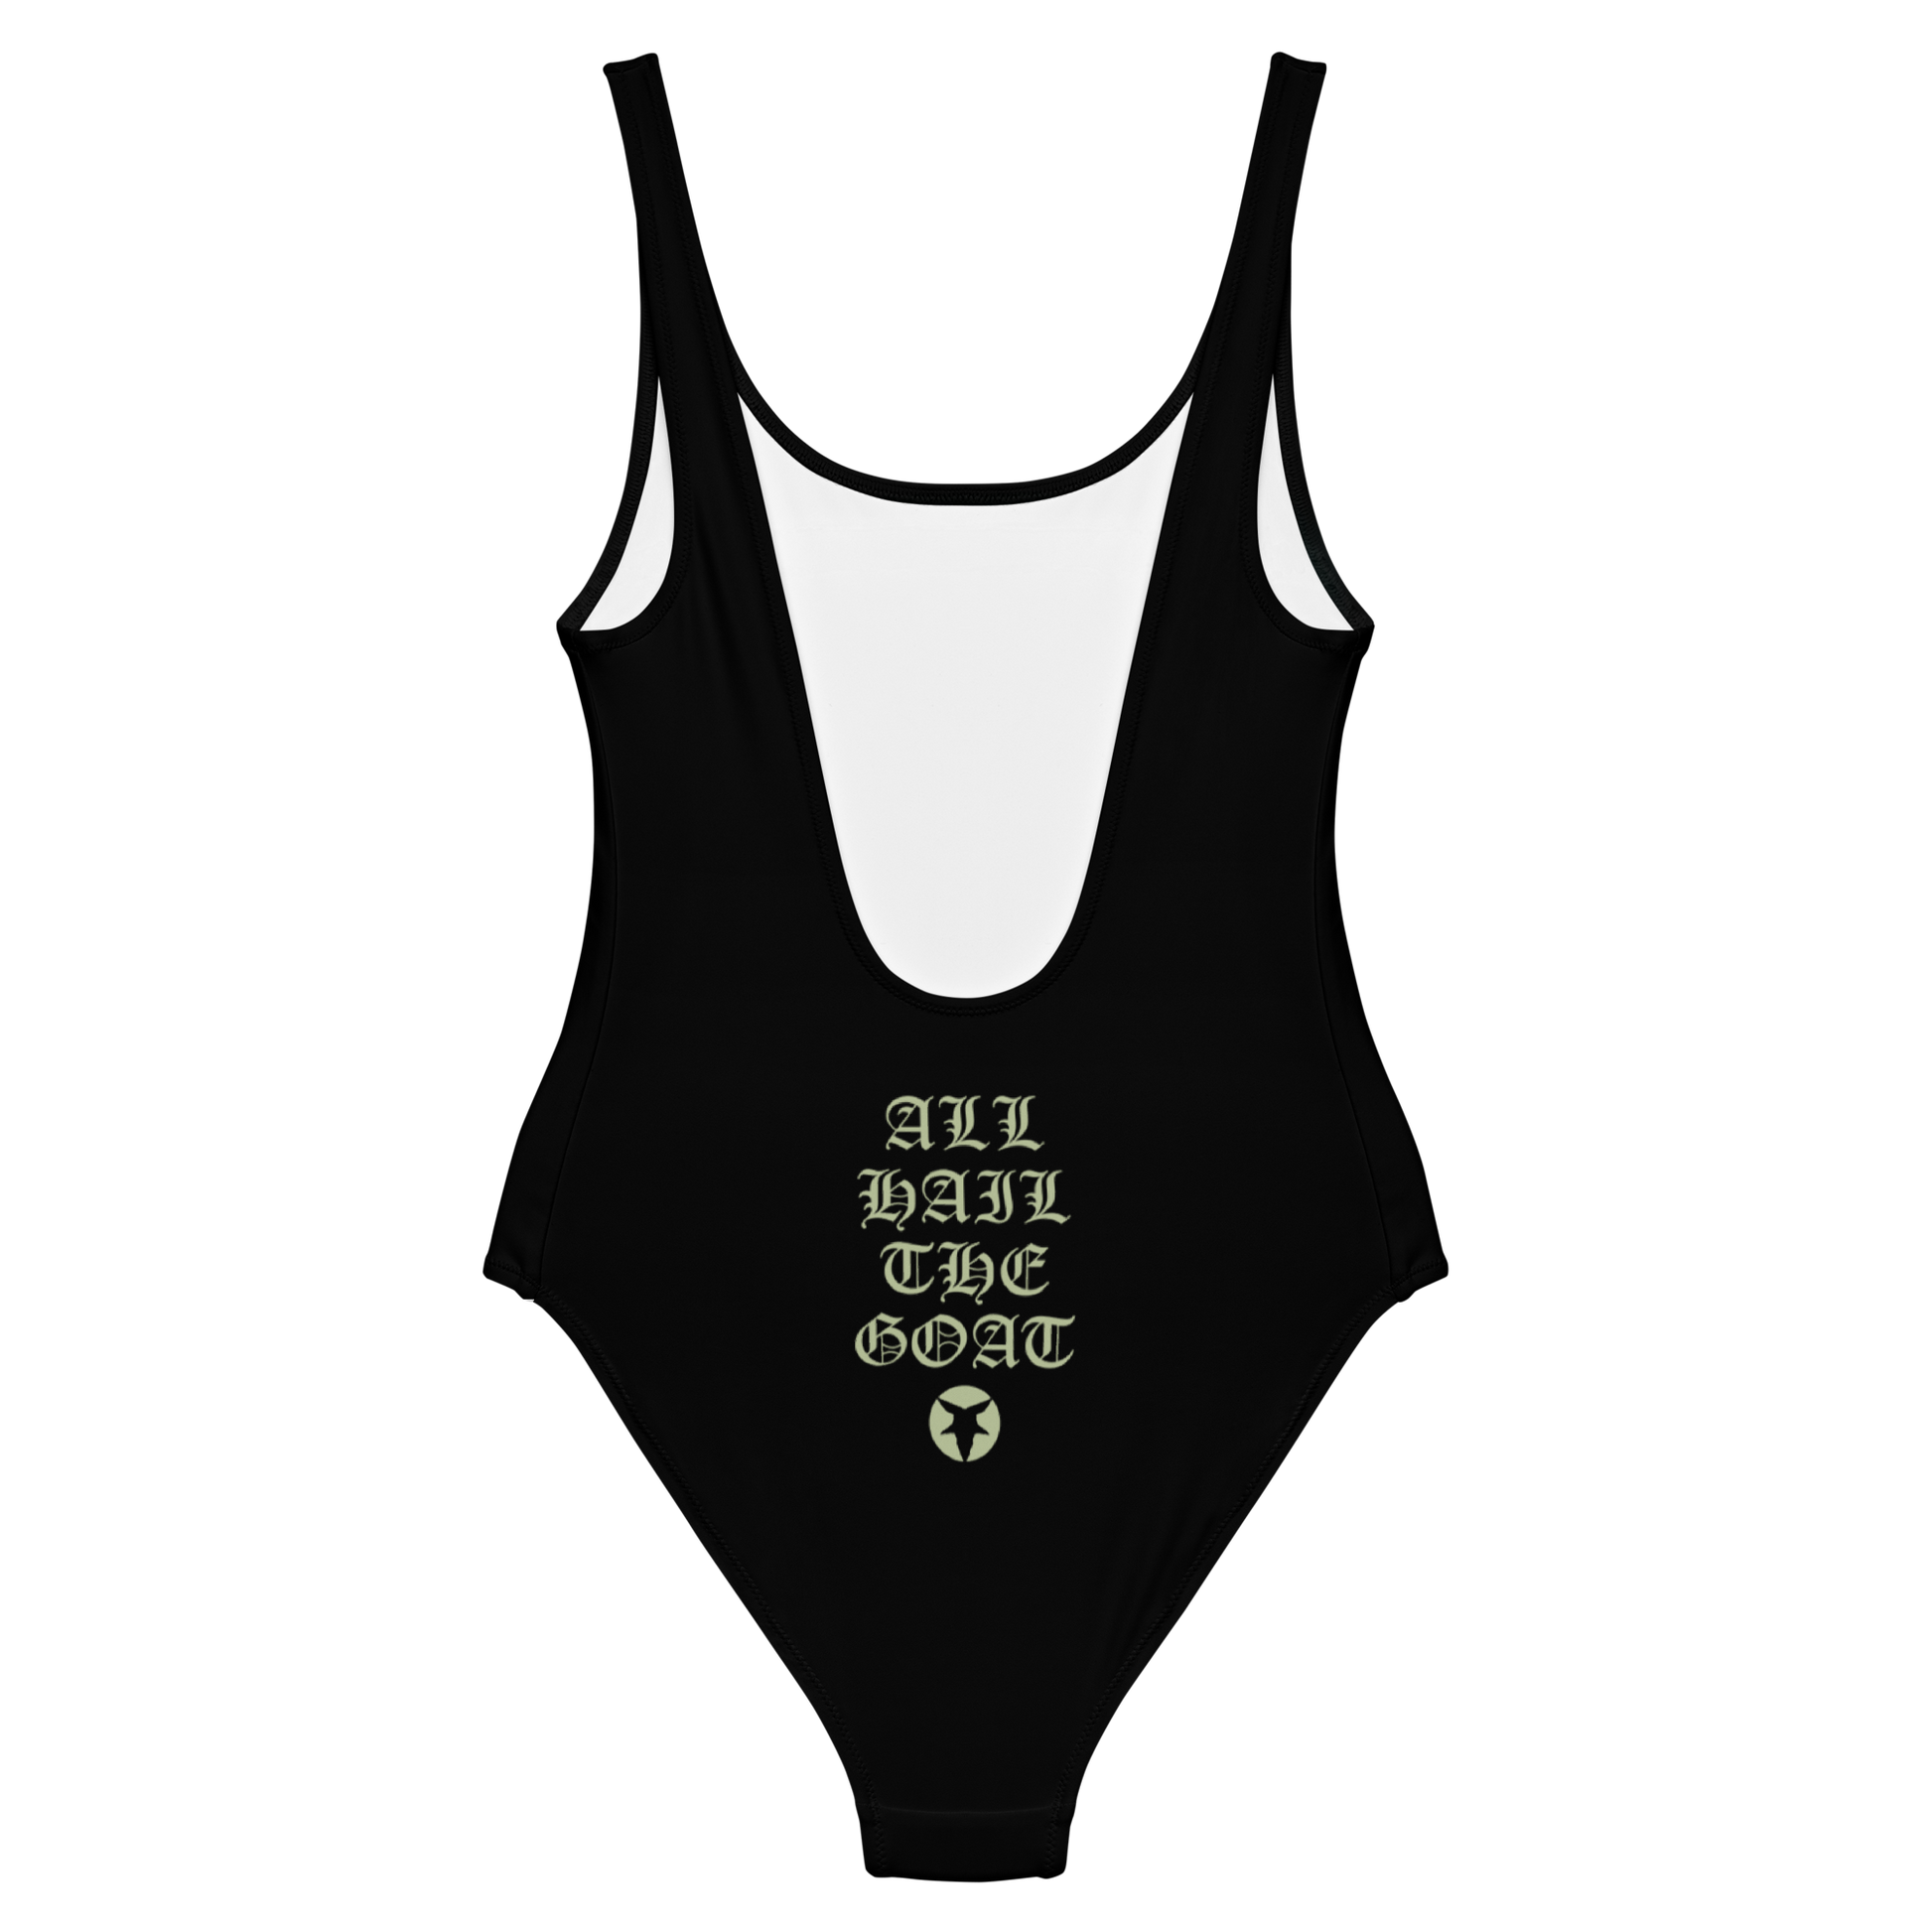 Hellripper - Warlocks Grim & Withered Hags Official One-Piece Swimming Bodysuit by Metal Mistress